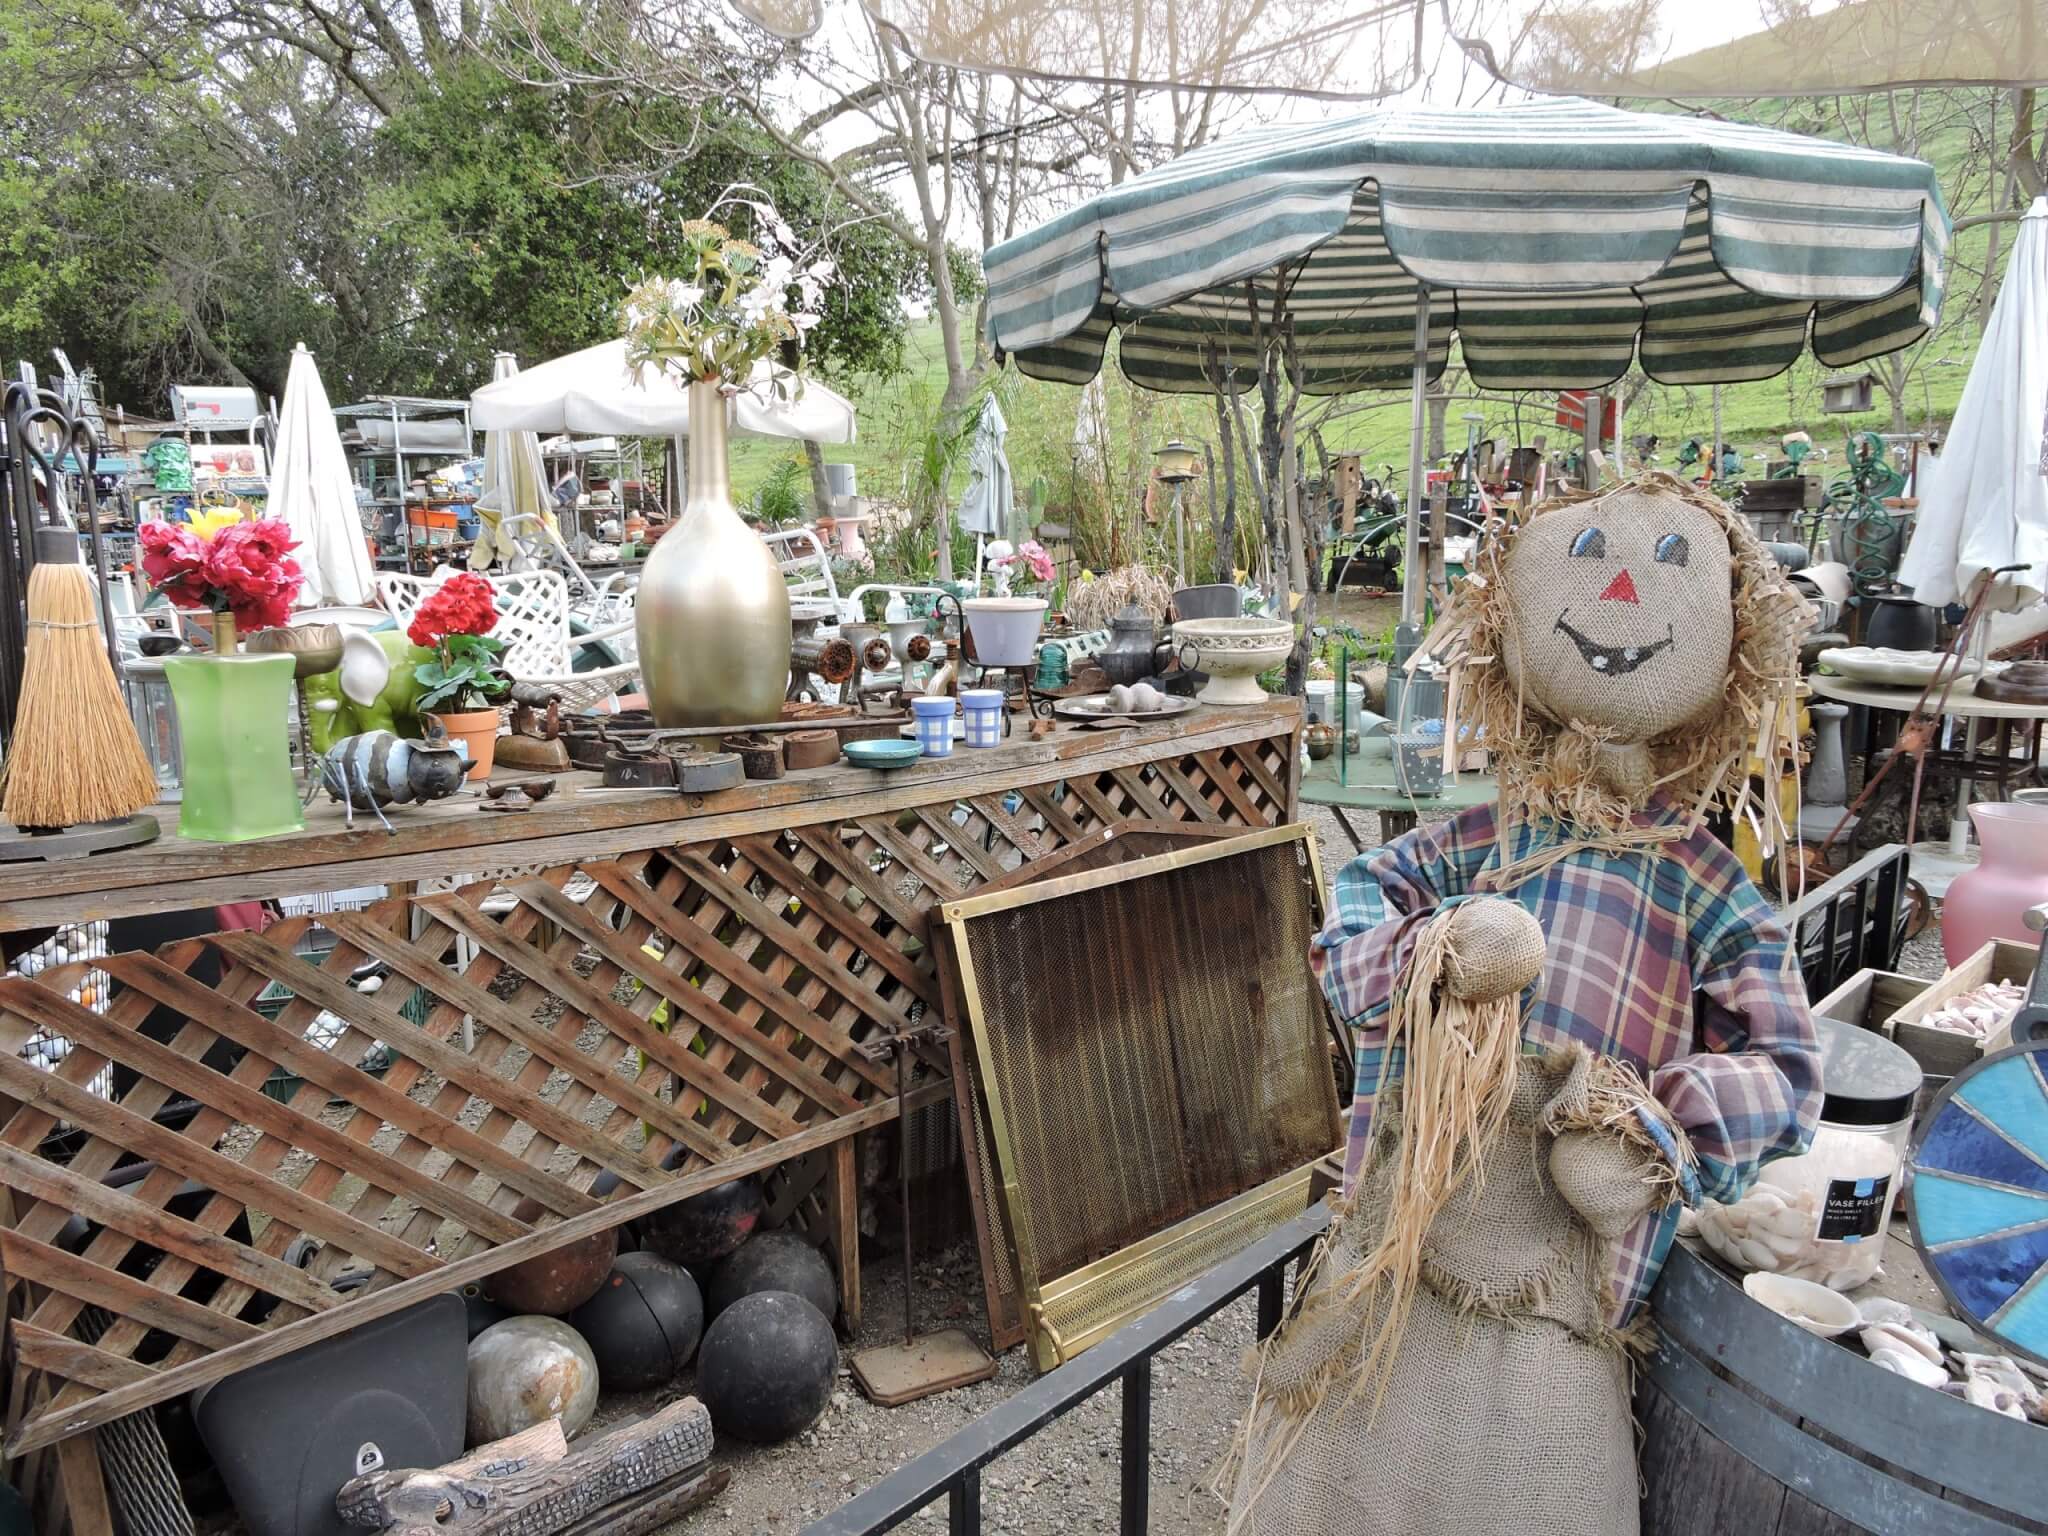 Hunt for treasures at Suisun Valley Antiques & Collectibles